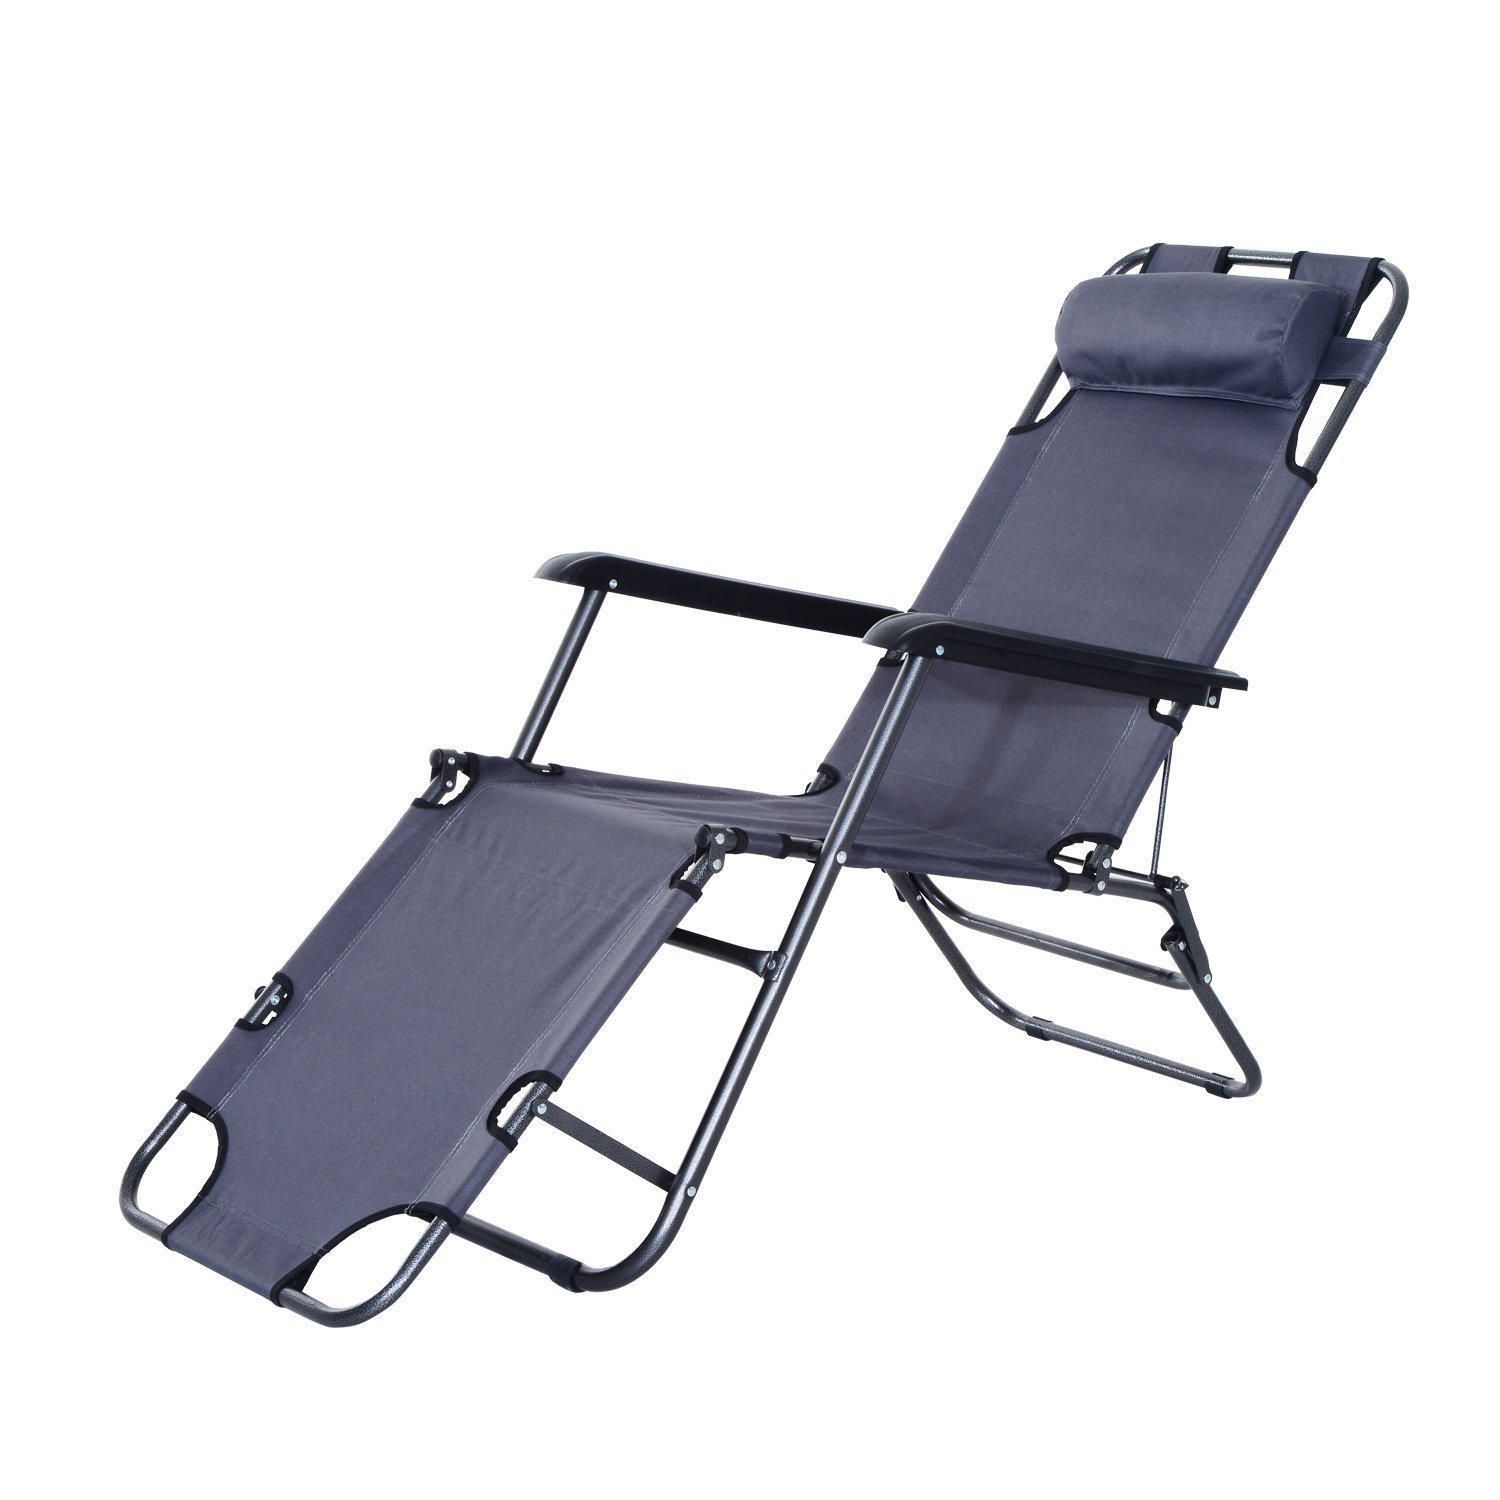 Outsunny Folding Lounge Chair, Folding Lounge Chairs Canada